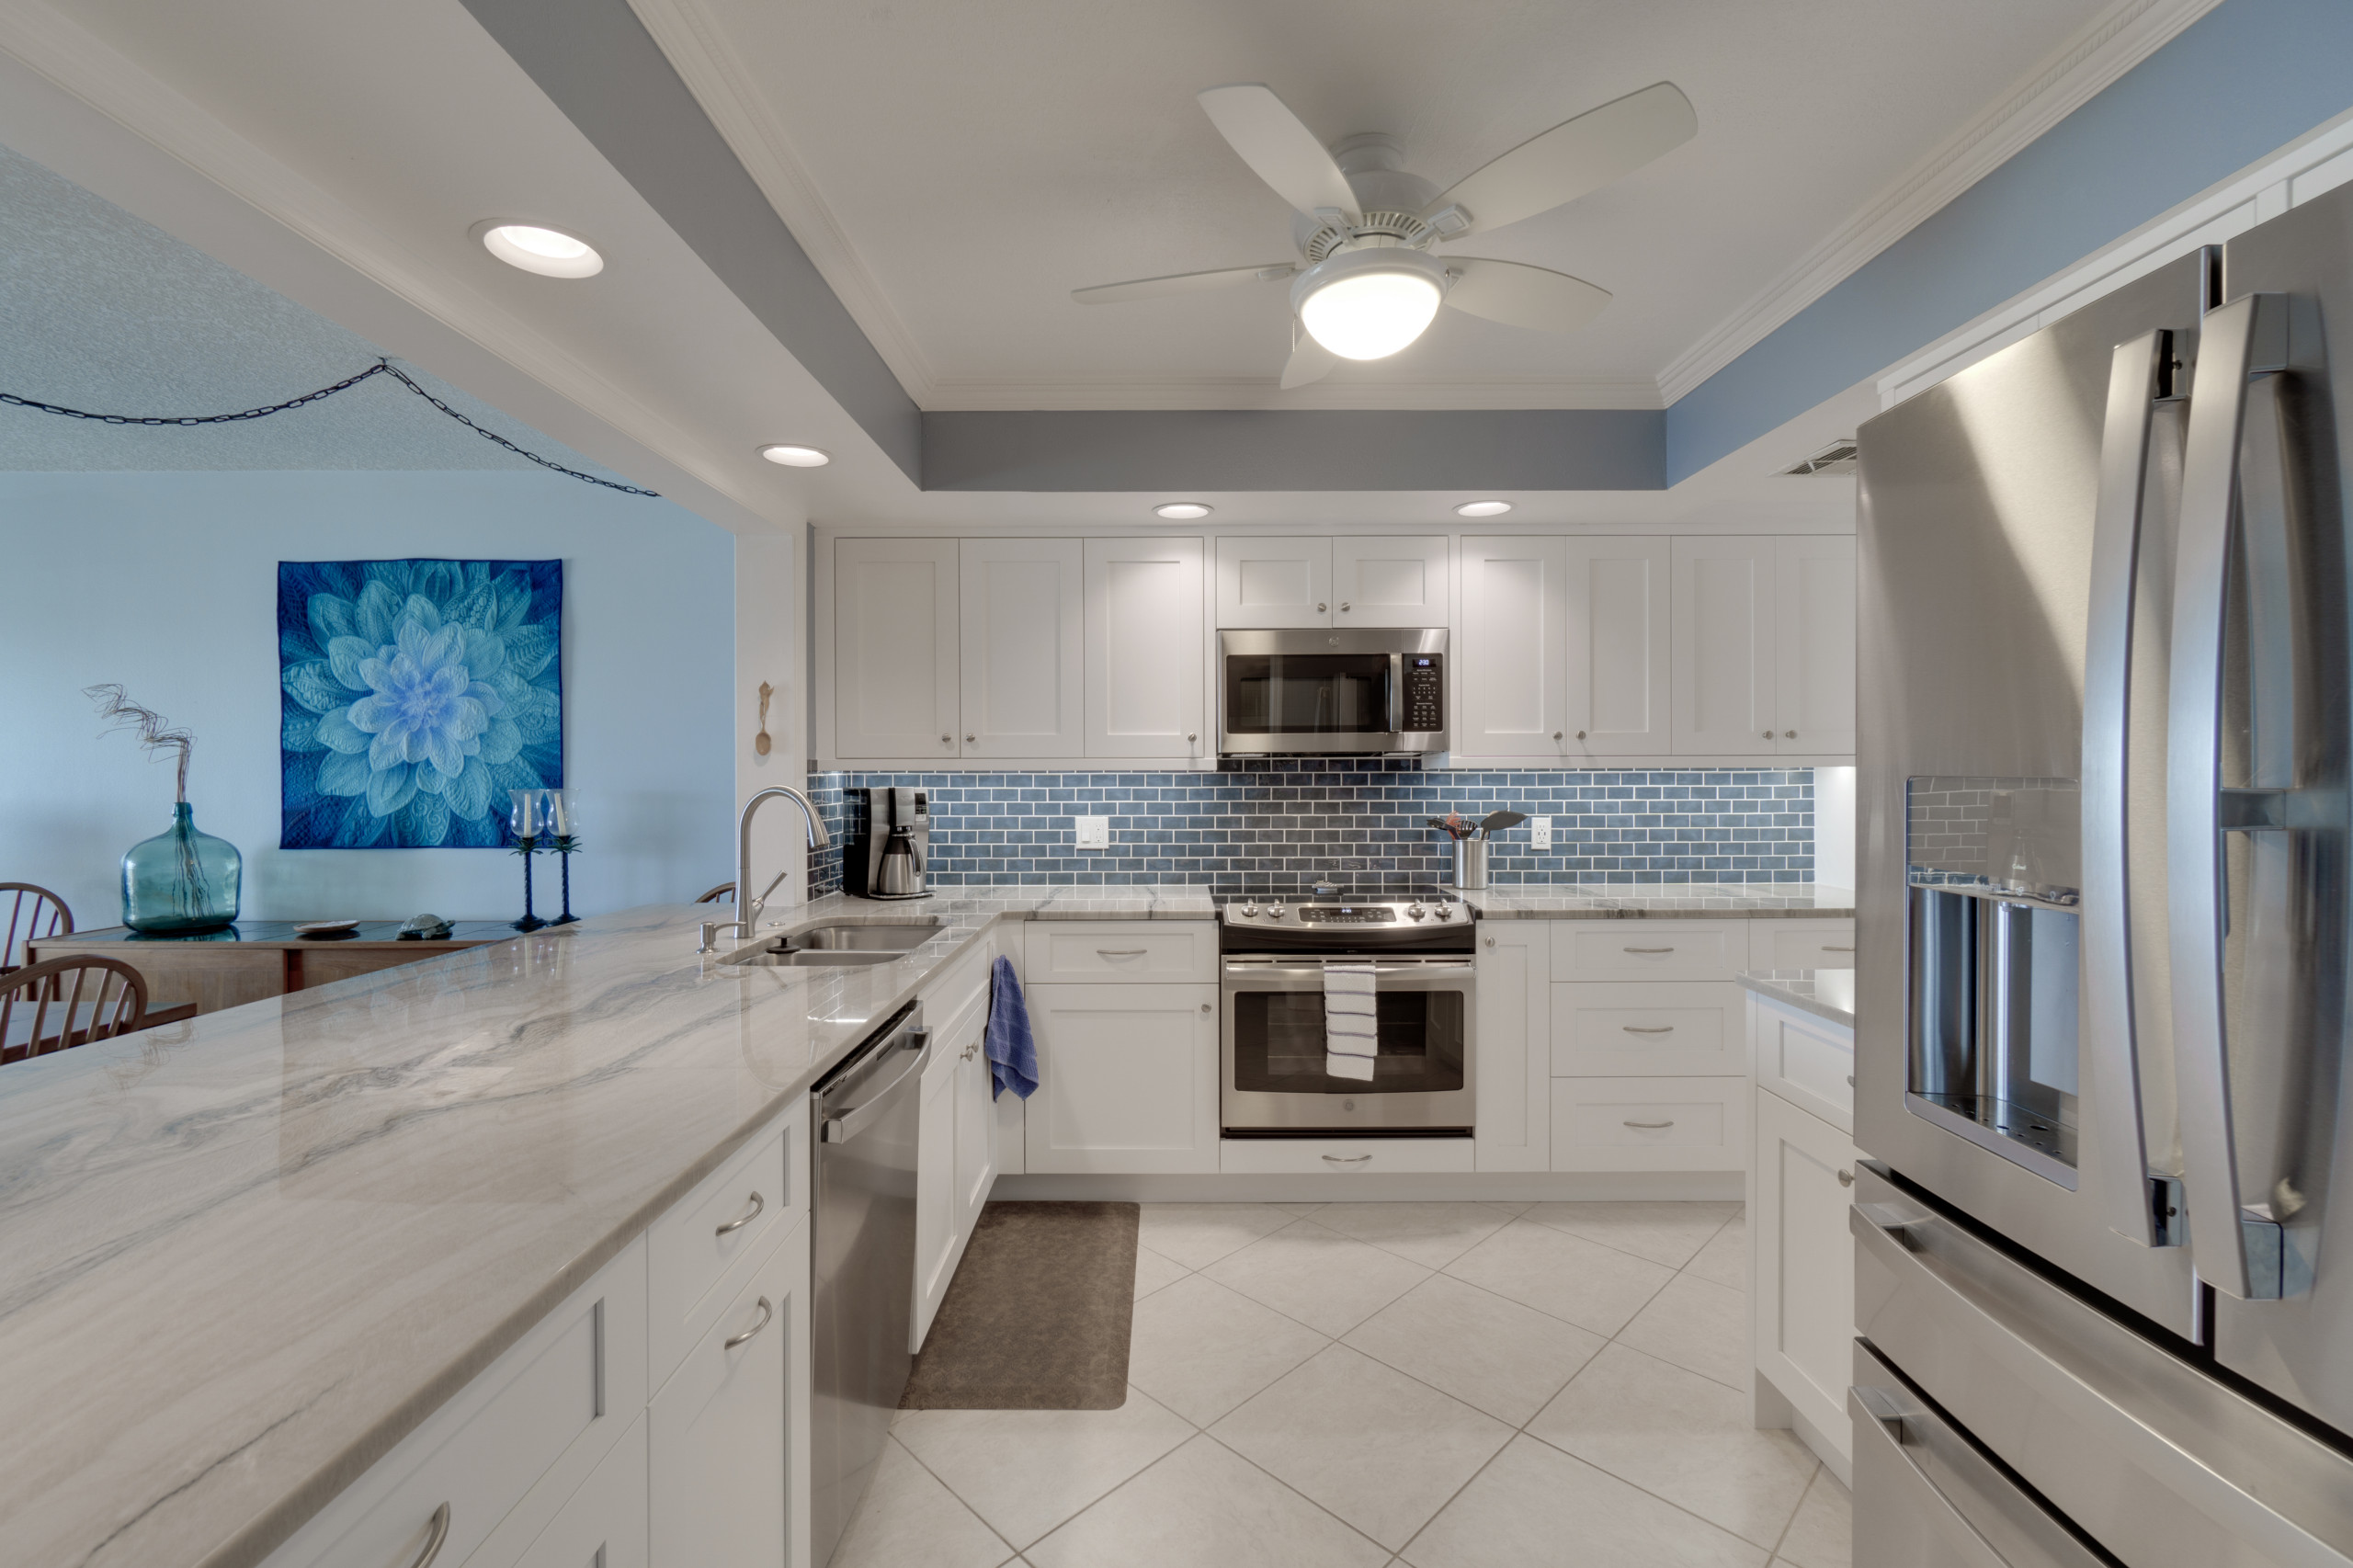 Condo Kitchen Remodel in Painted White Shaker